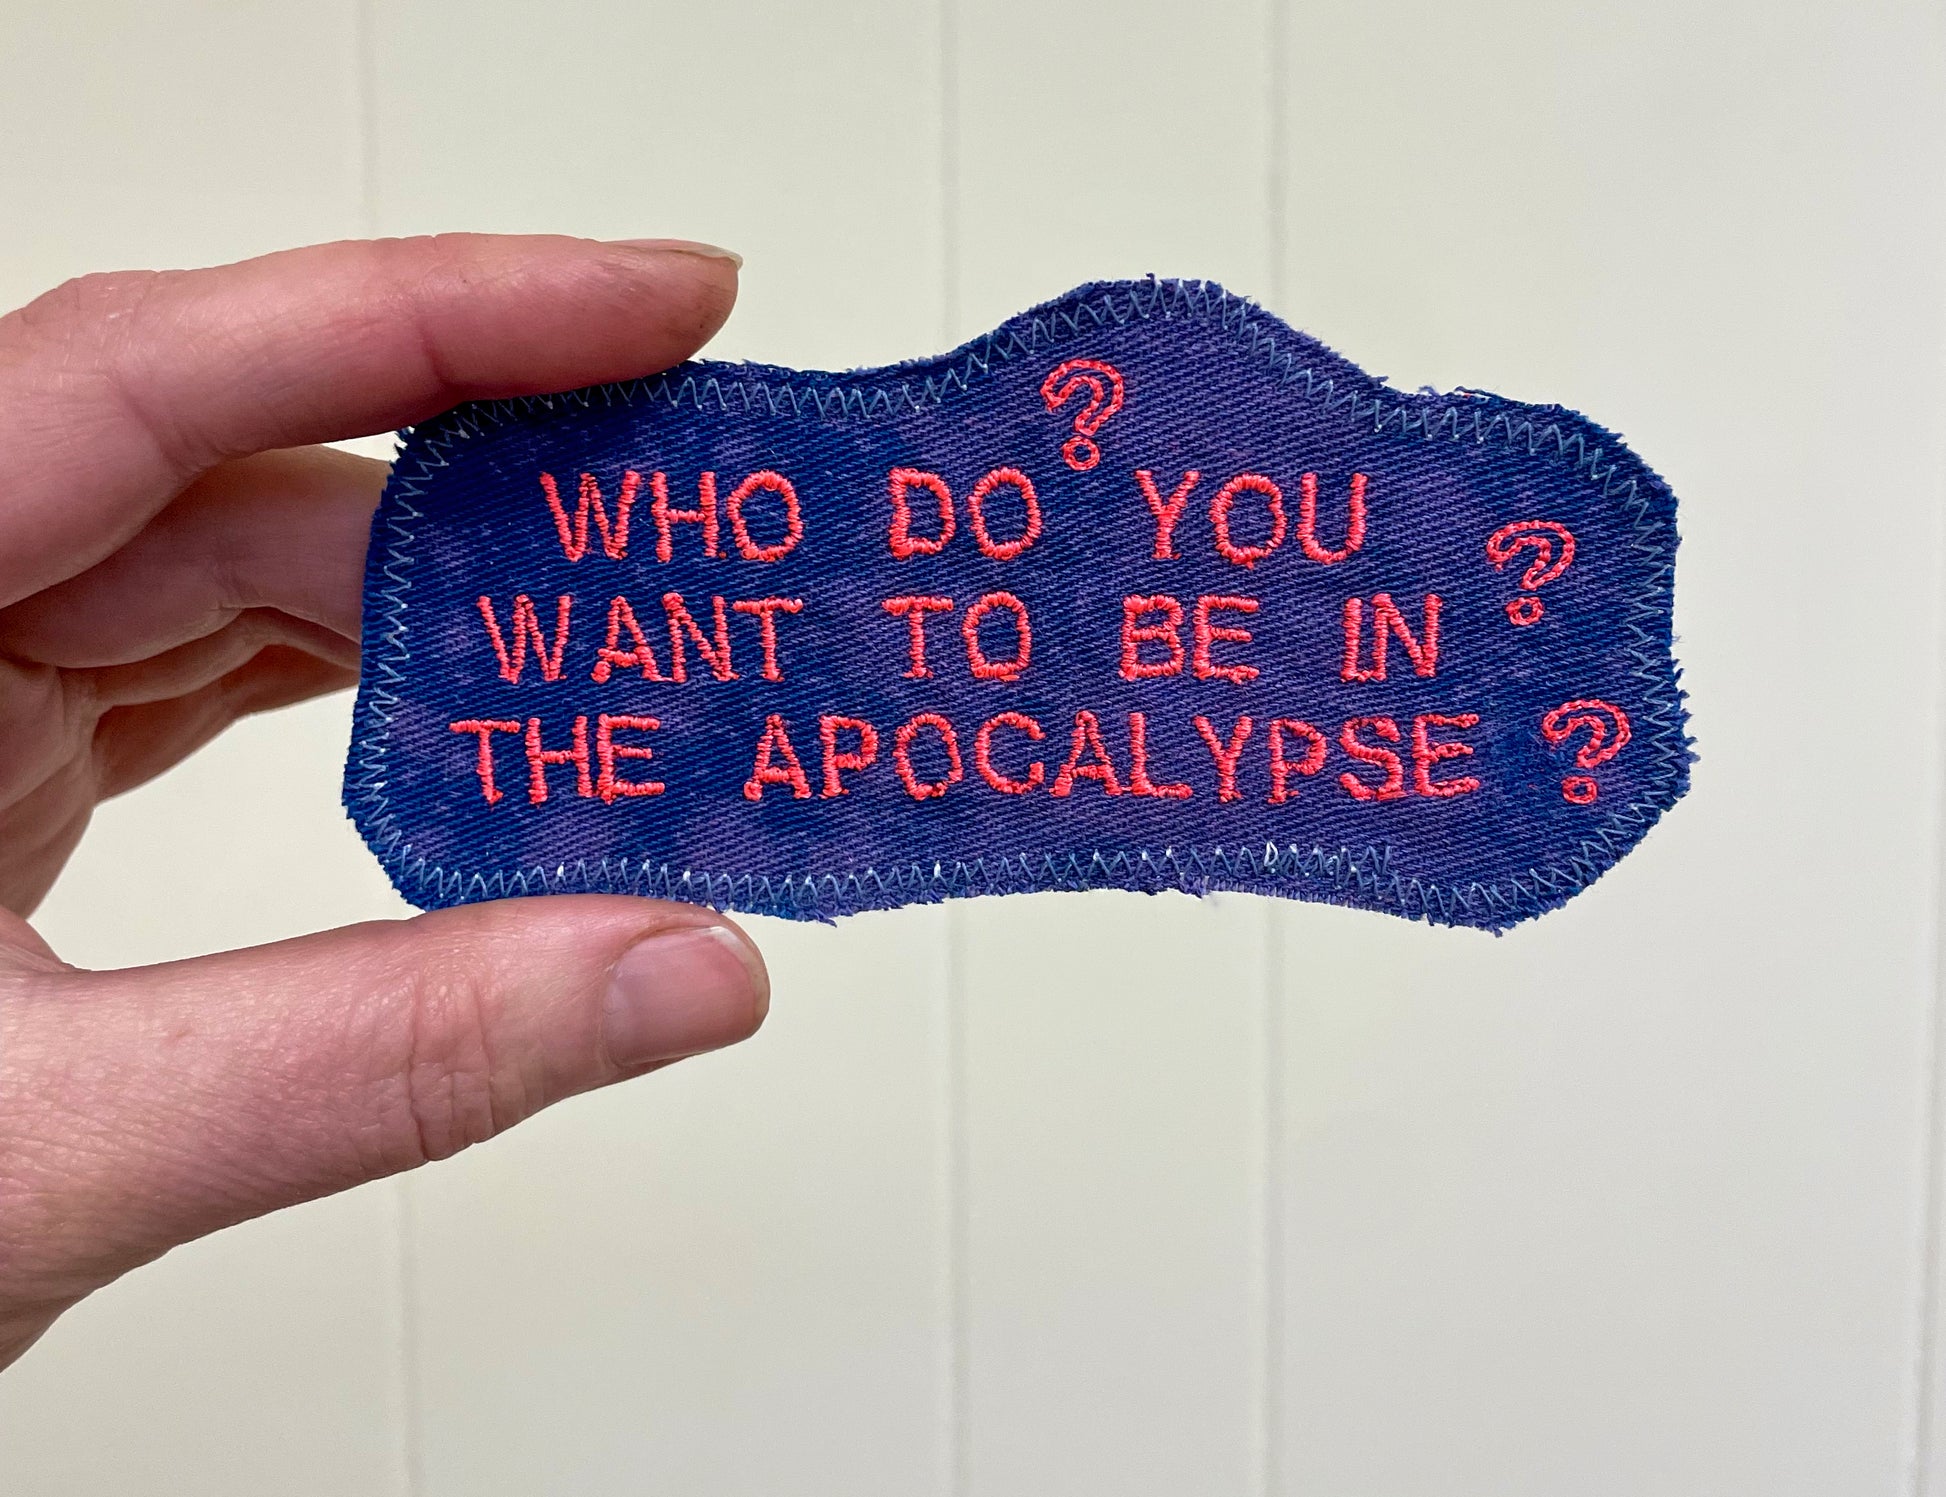 a hand holding a patch that says who do you want to be in the ap